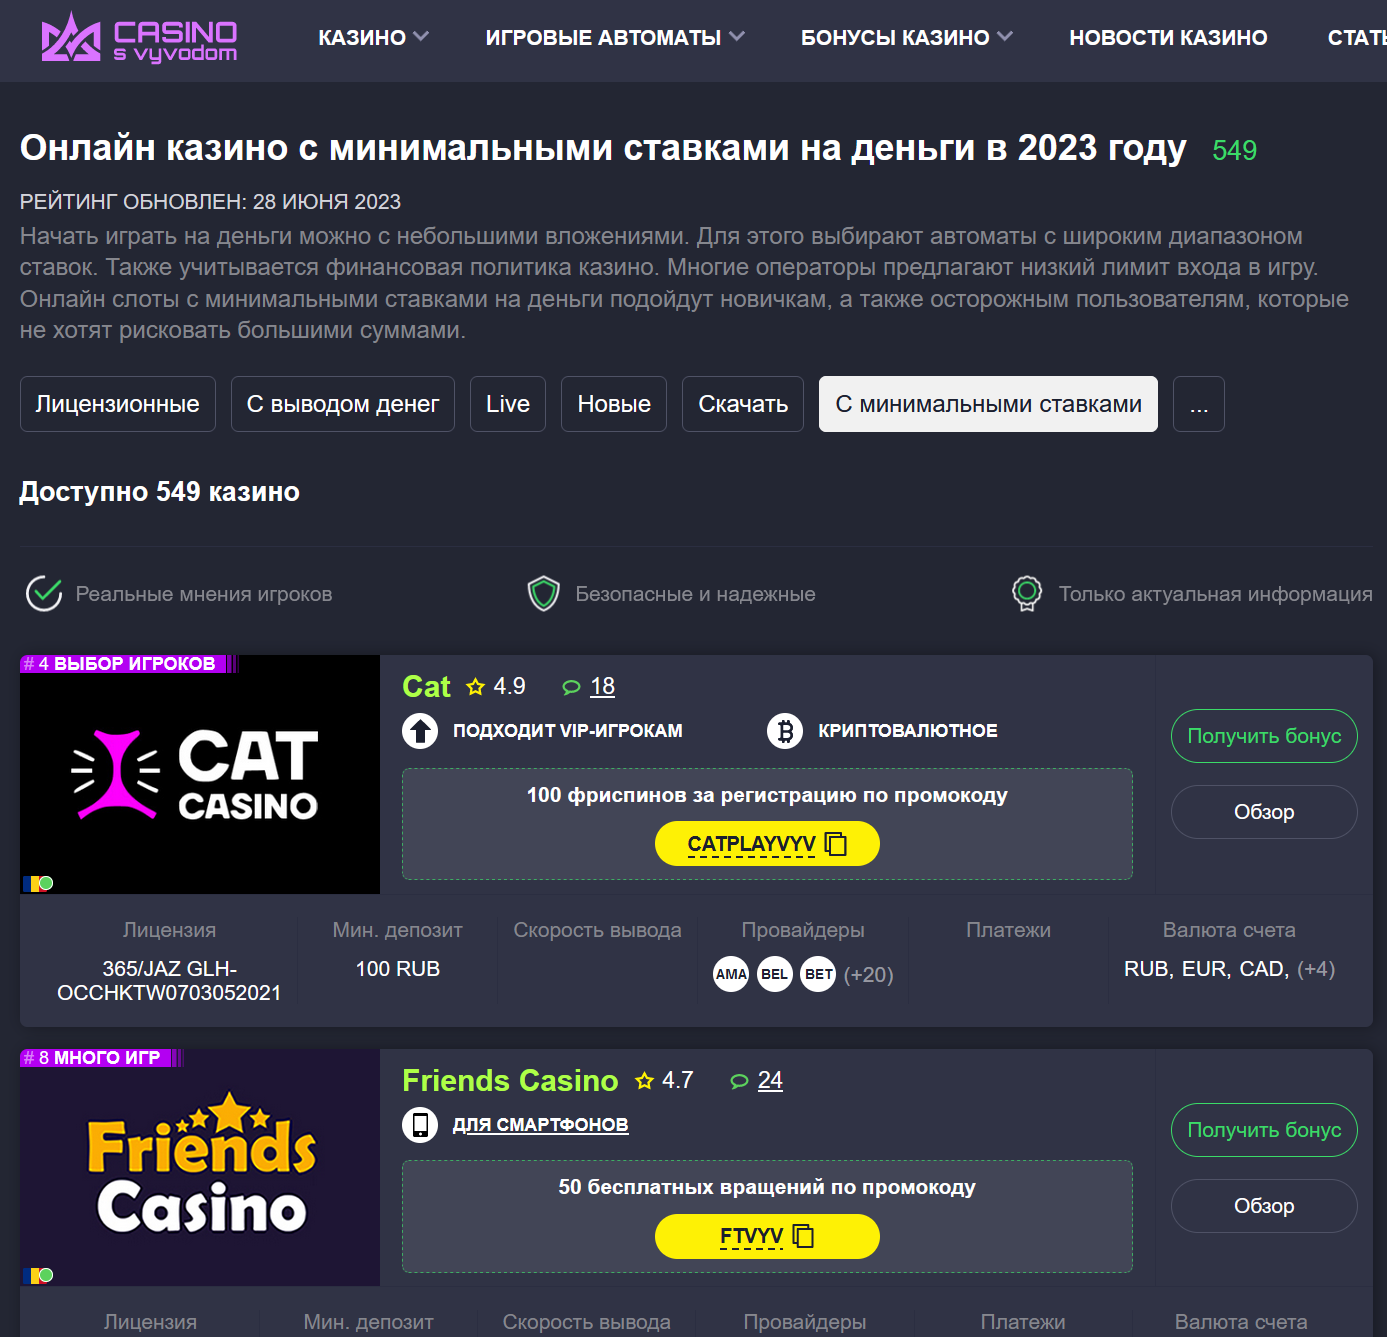 Top casinos with minimal bets